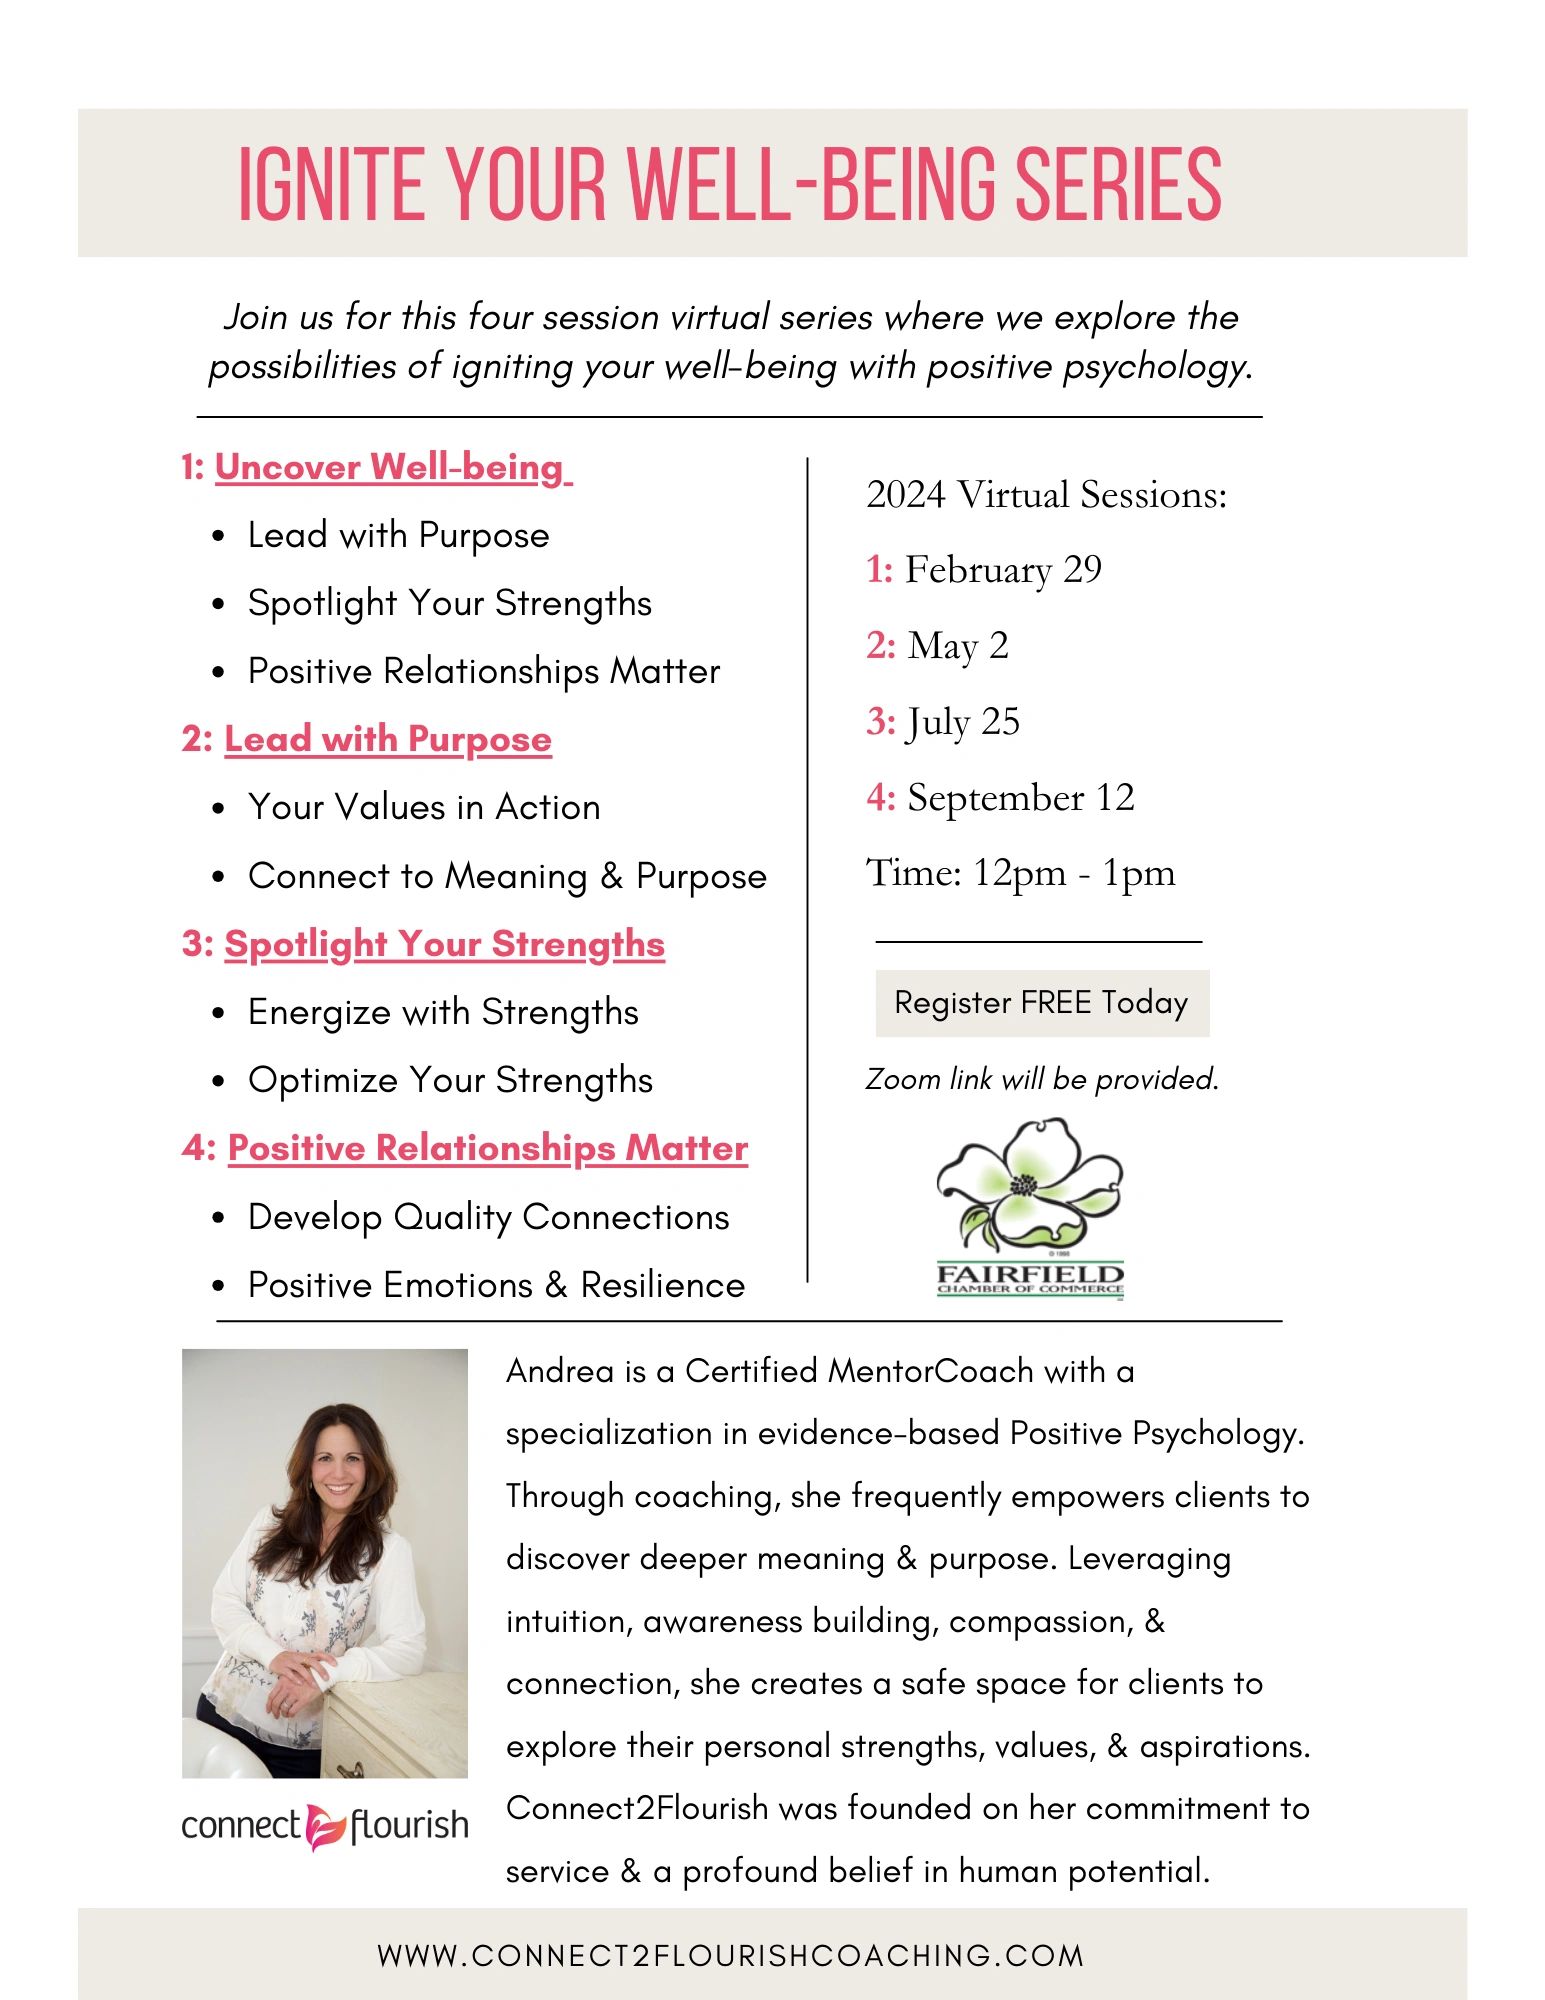 Ignite Your Well-being - 2024 Virtual Series with Andrea Kopilak, CMC of Connect2Flourish Coaching.